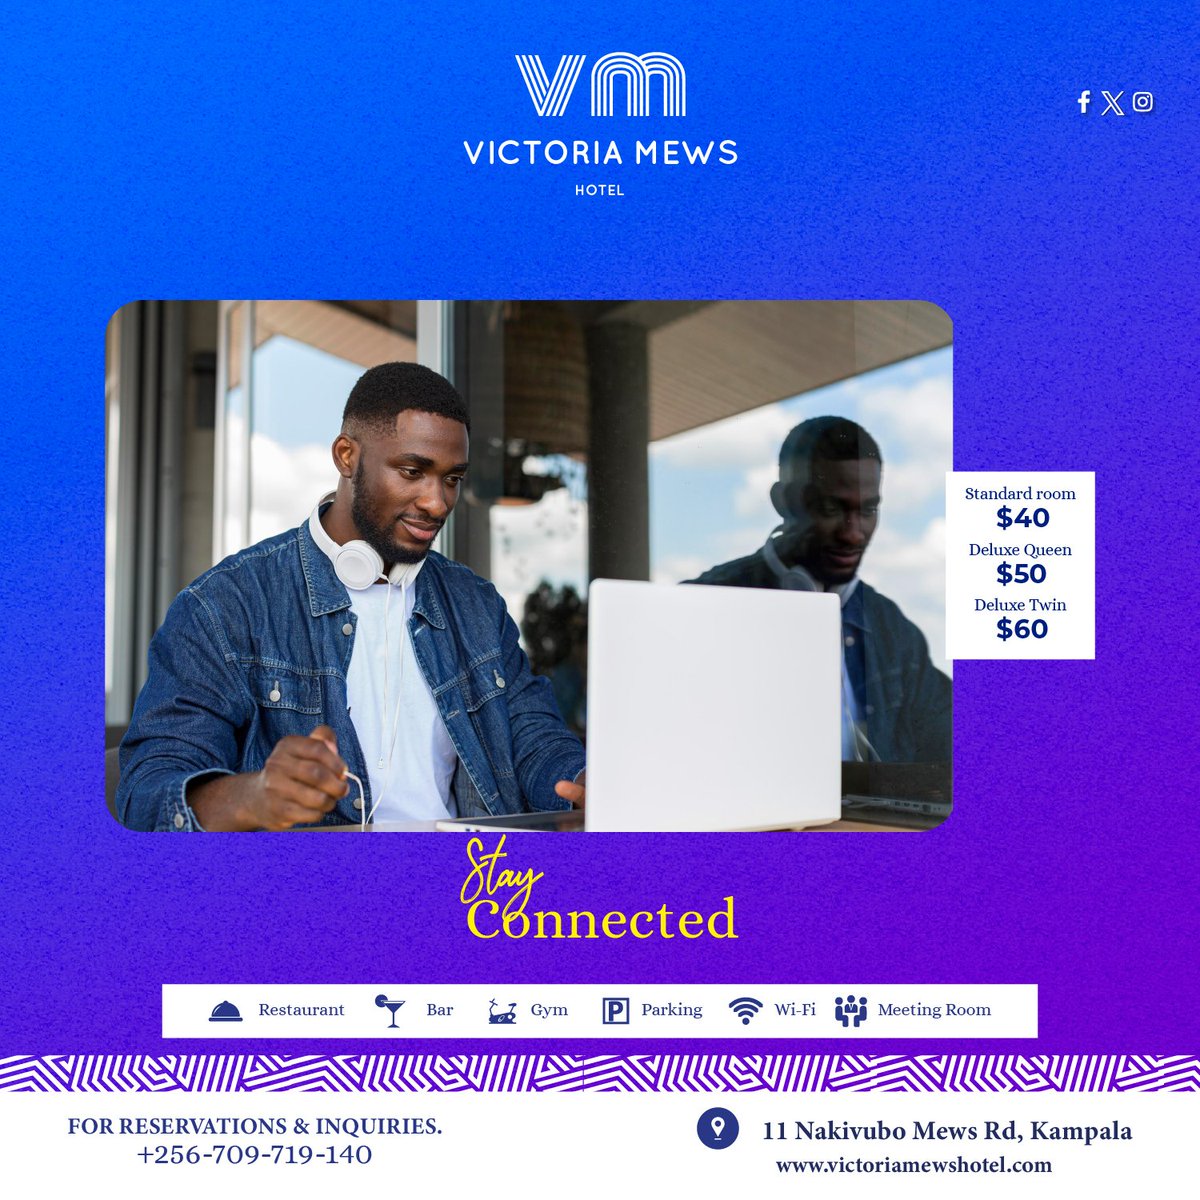 Stay connected with free WiFi at Victoria Mews Hotel! Share your Uganda adventures with loved ones back home. 

#VisitUganda #StayConnected #VictoriaMewsHotel